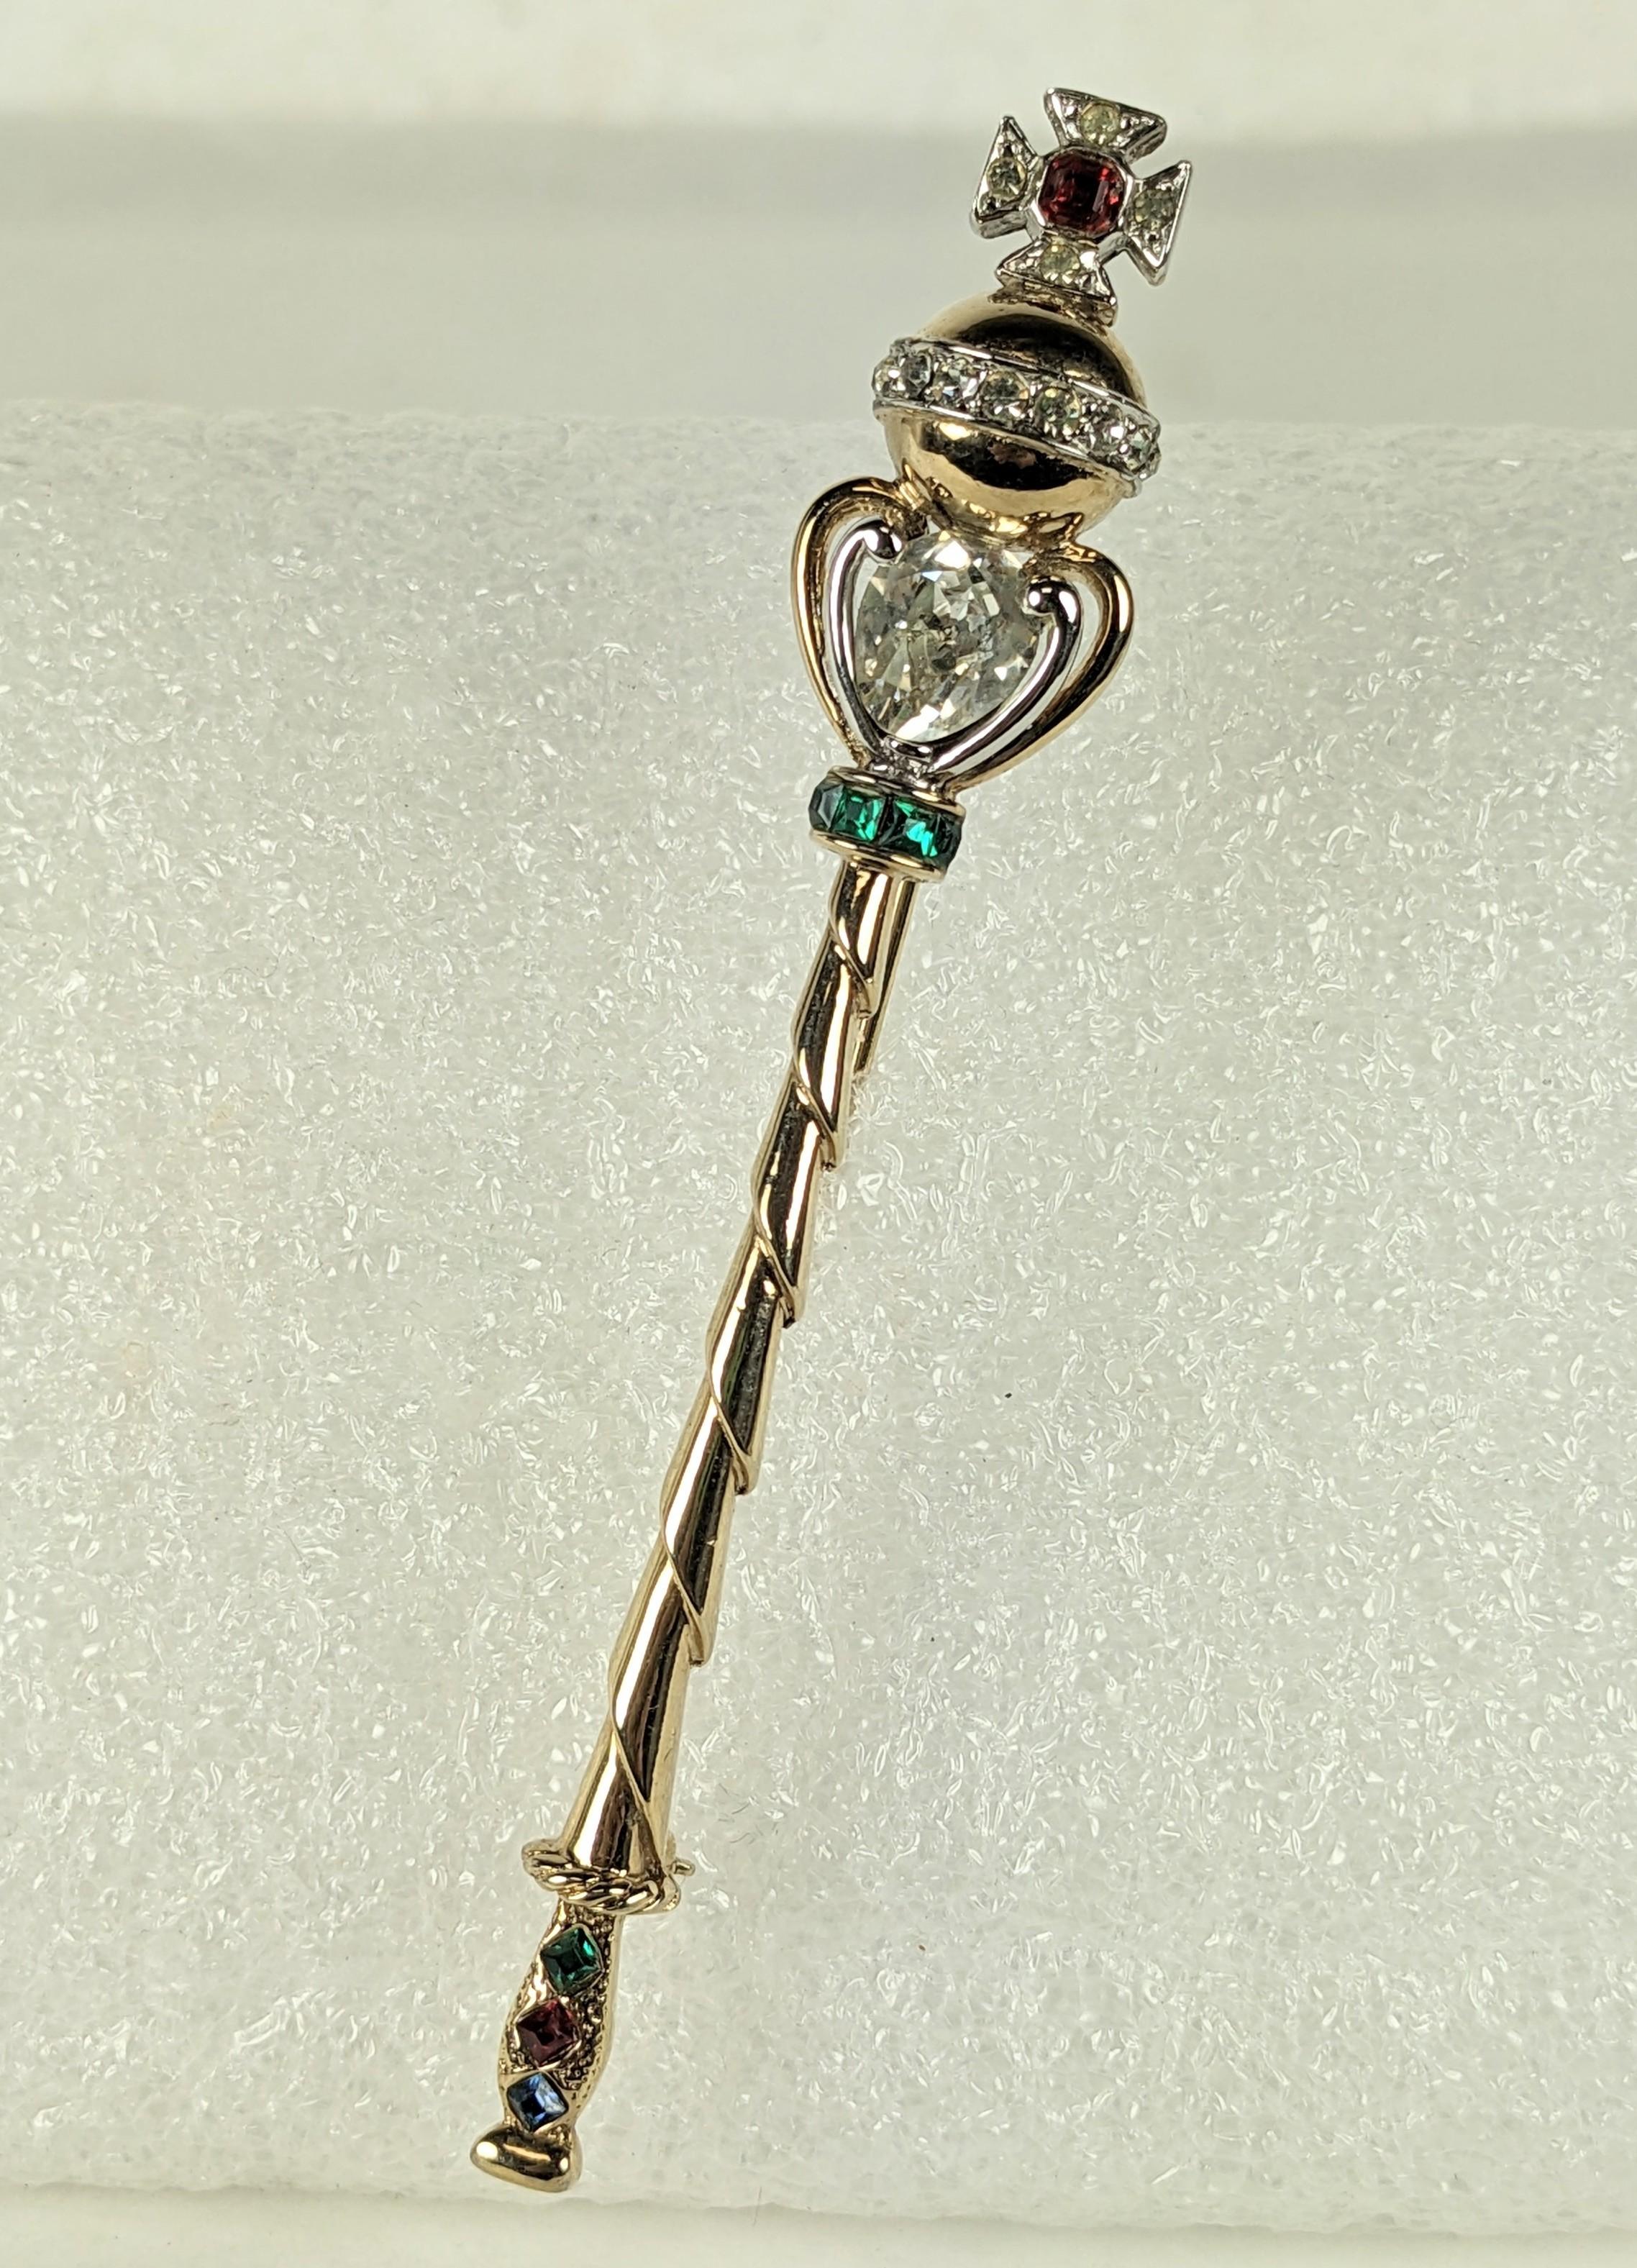 Charming and rare Marcel Boucher Royal Scepter Brooch from the 1950's with early MB mark. From the series created in 1953, the year of Elizabeth II's coronation.  3.5